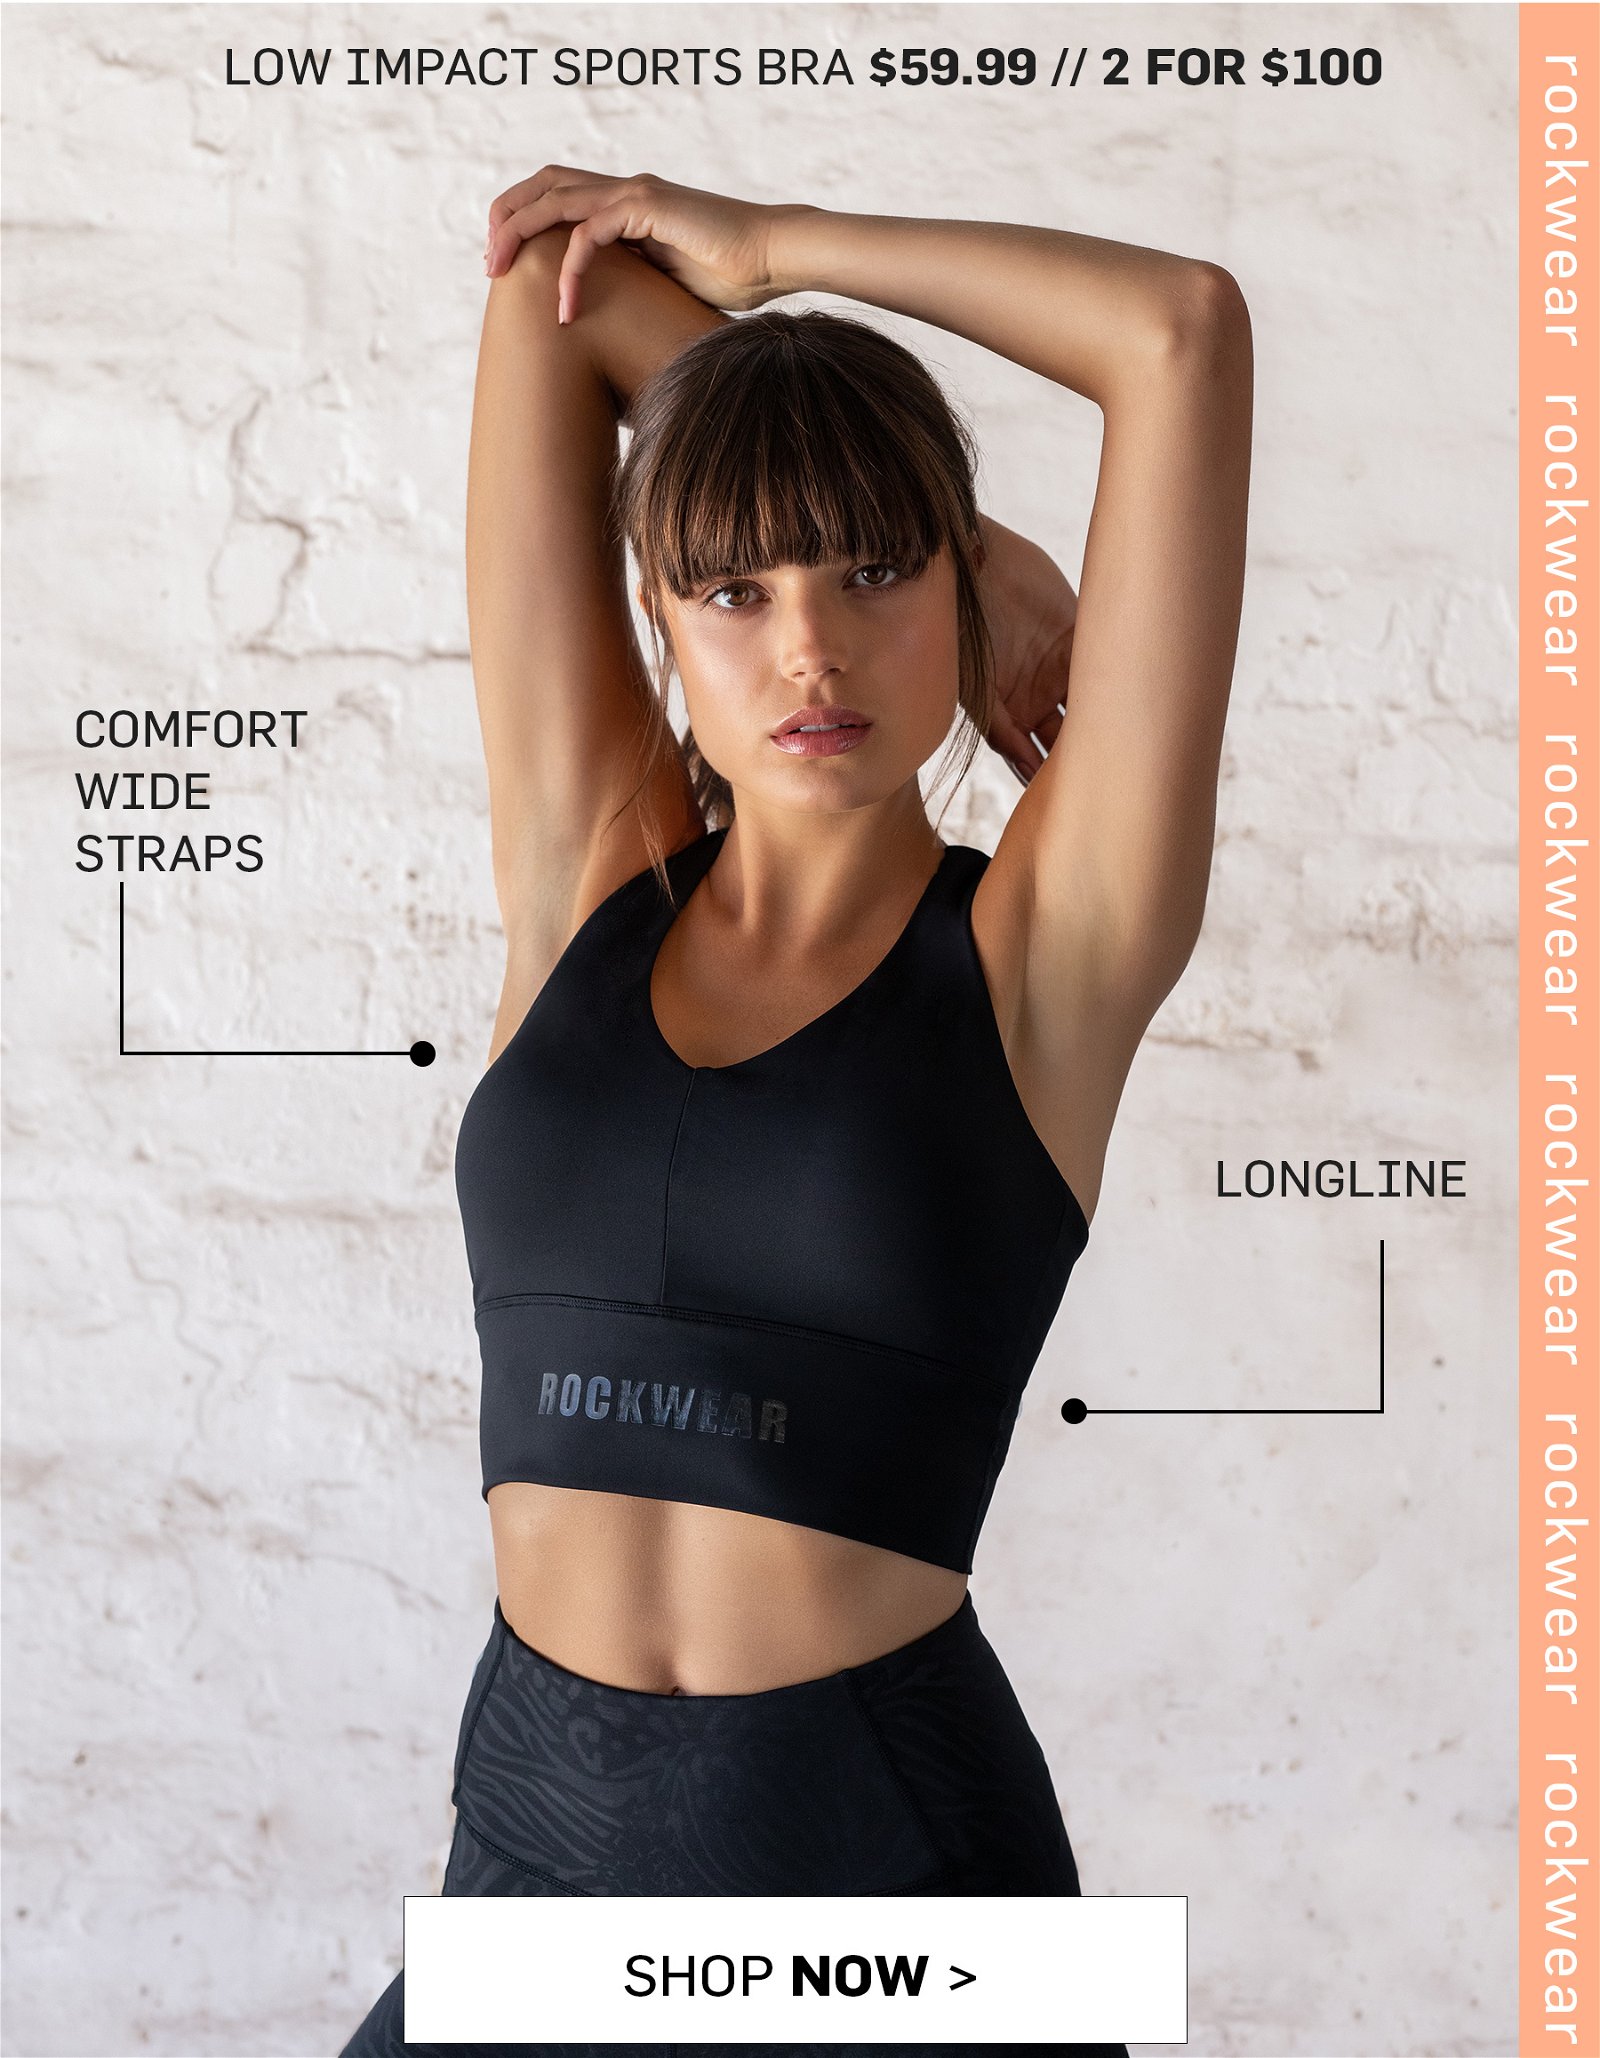 Rock Wear: Sports Bra Support Squad 🤸 say bye to bounce